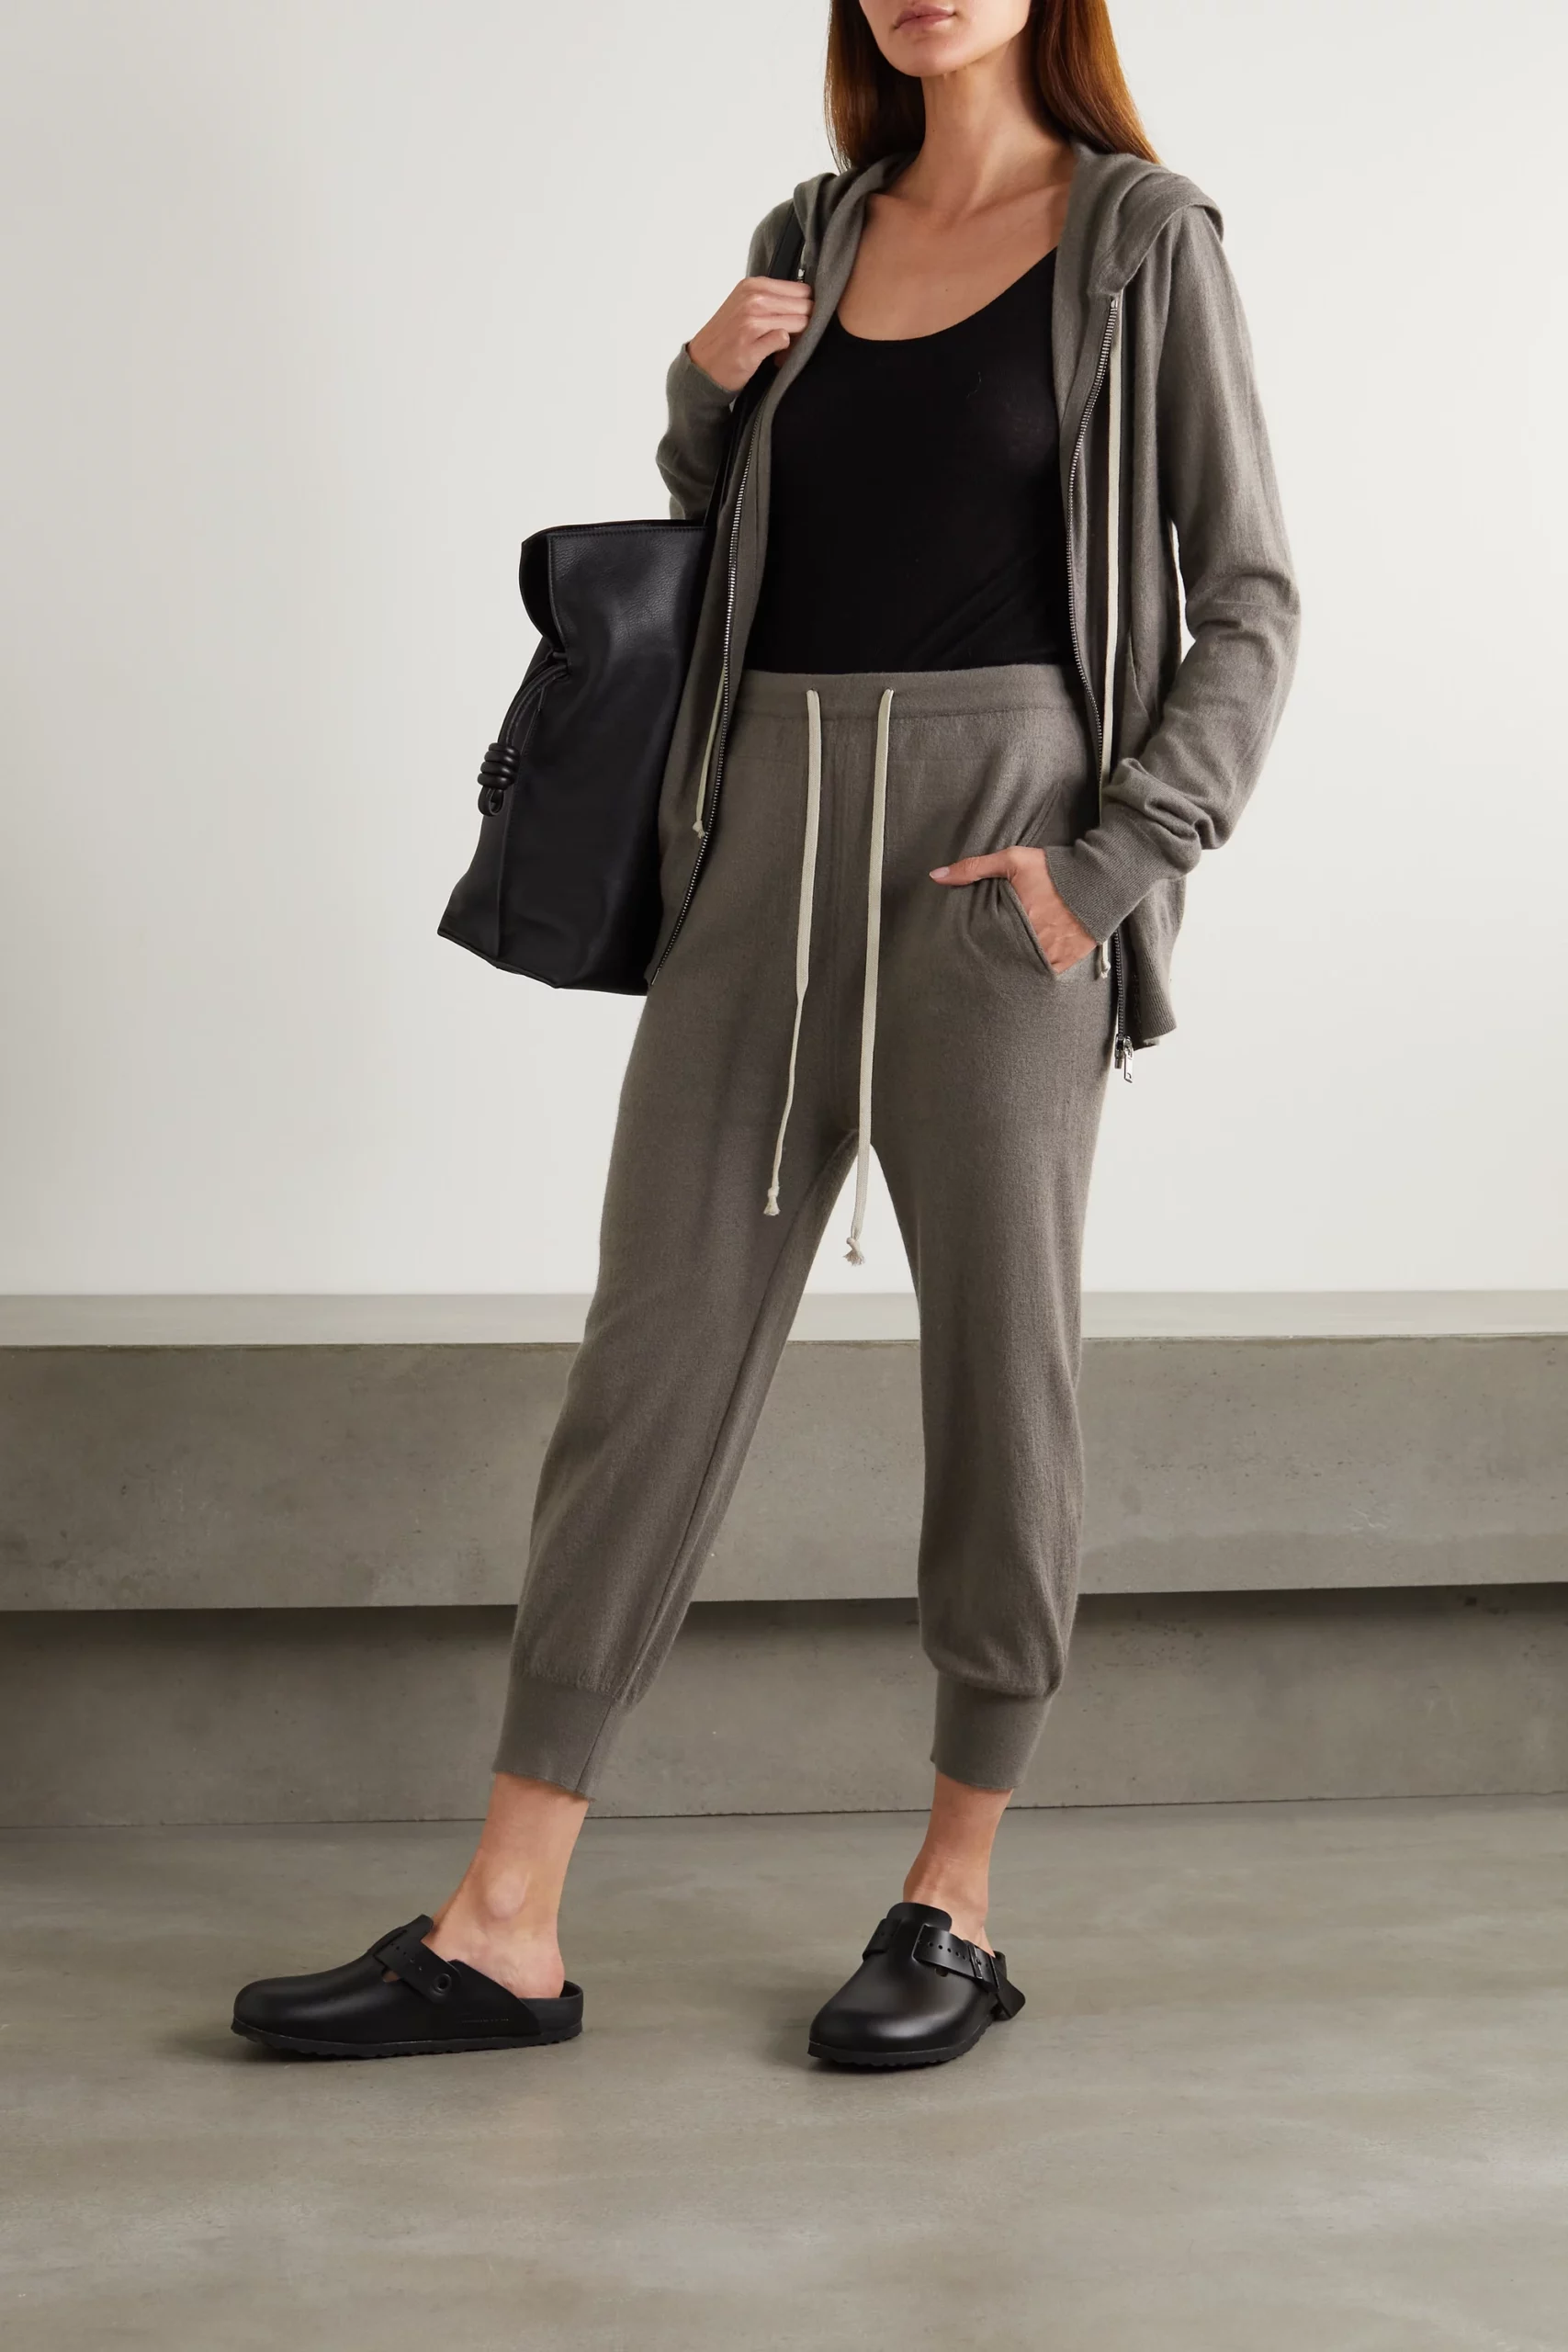 15 Outfits With Grey Sweatpants to Look Fantastic